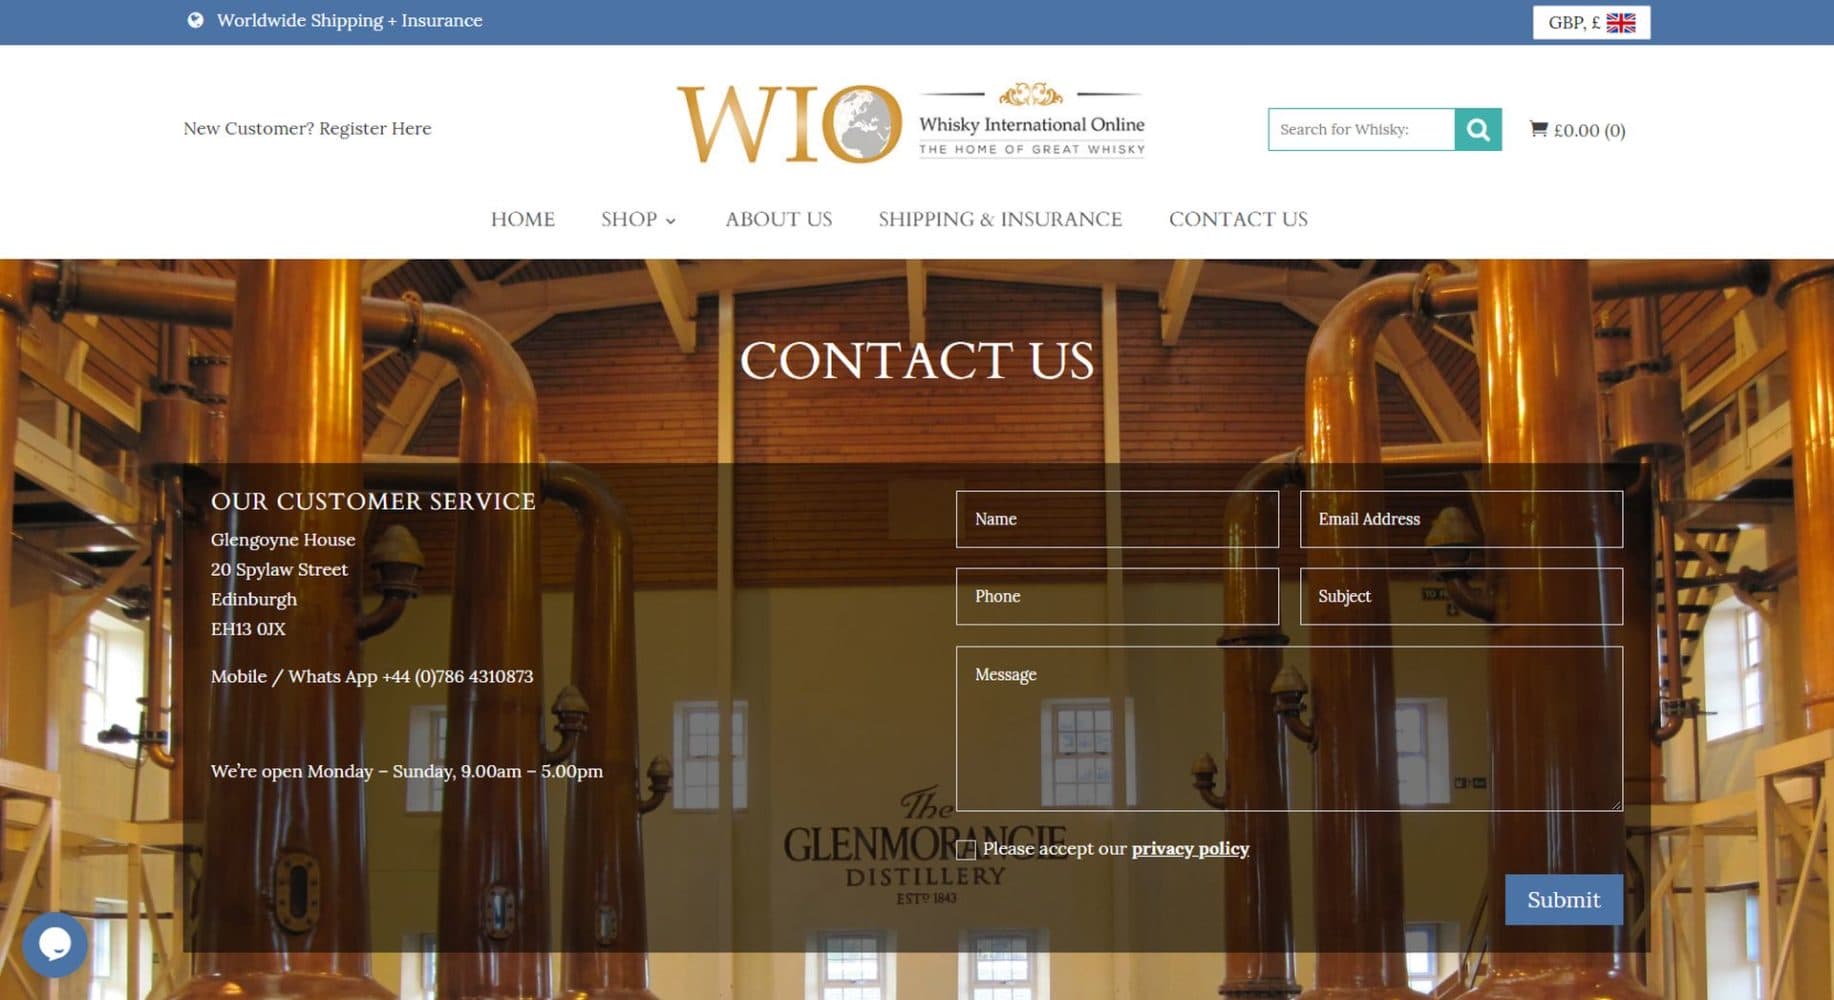 Whisky International Online Contact